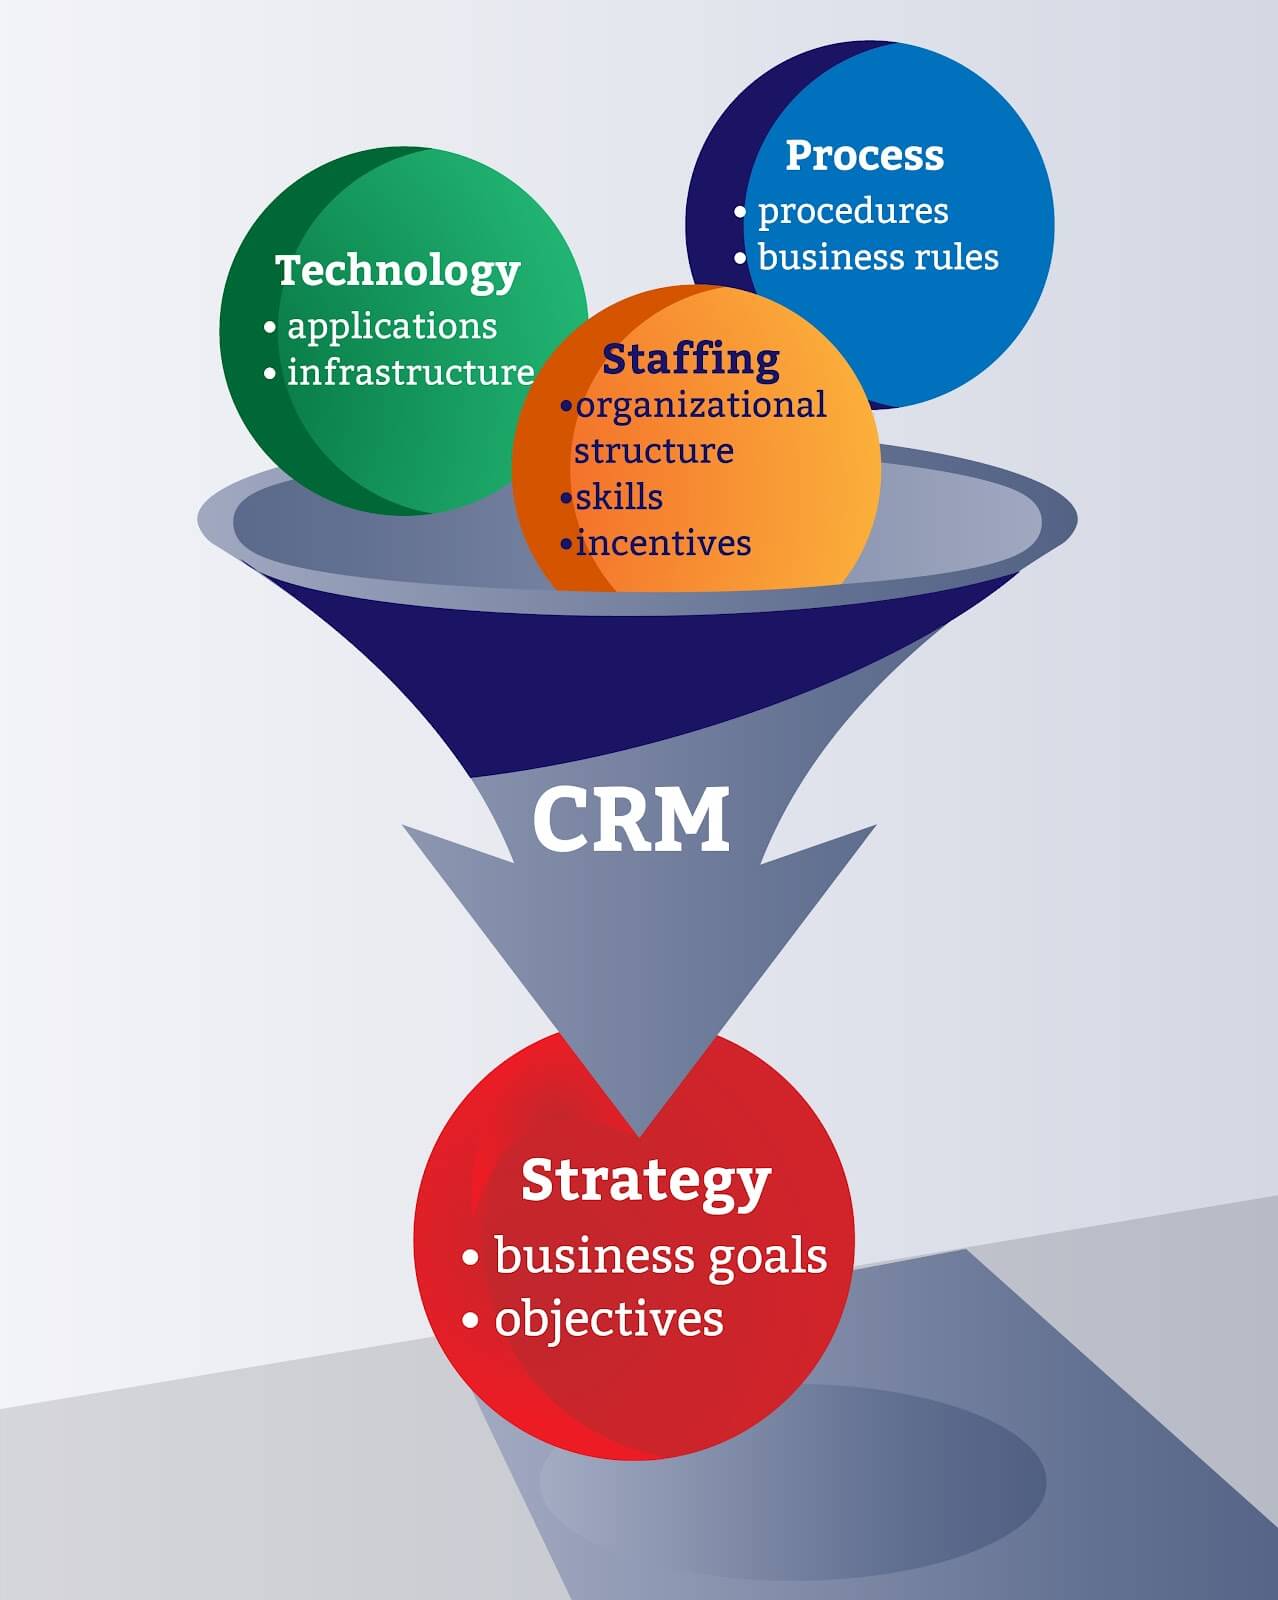 6. Strategies to Build Strong Relationships with Customers Using CRM